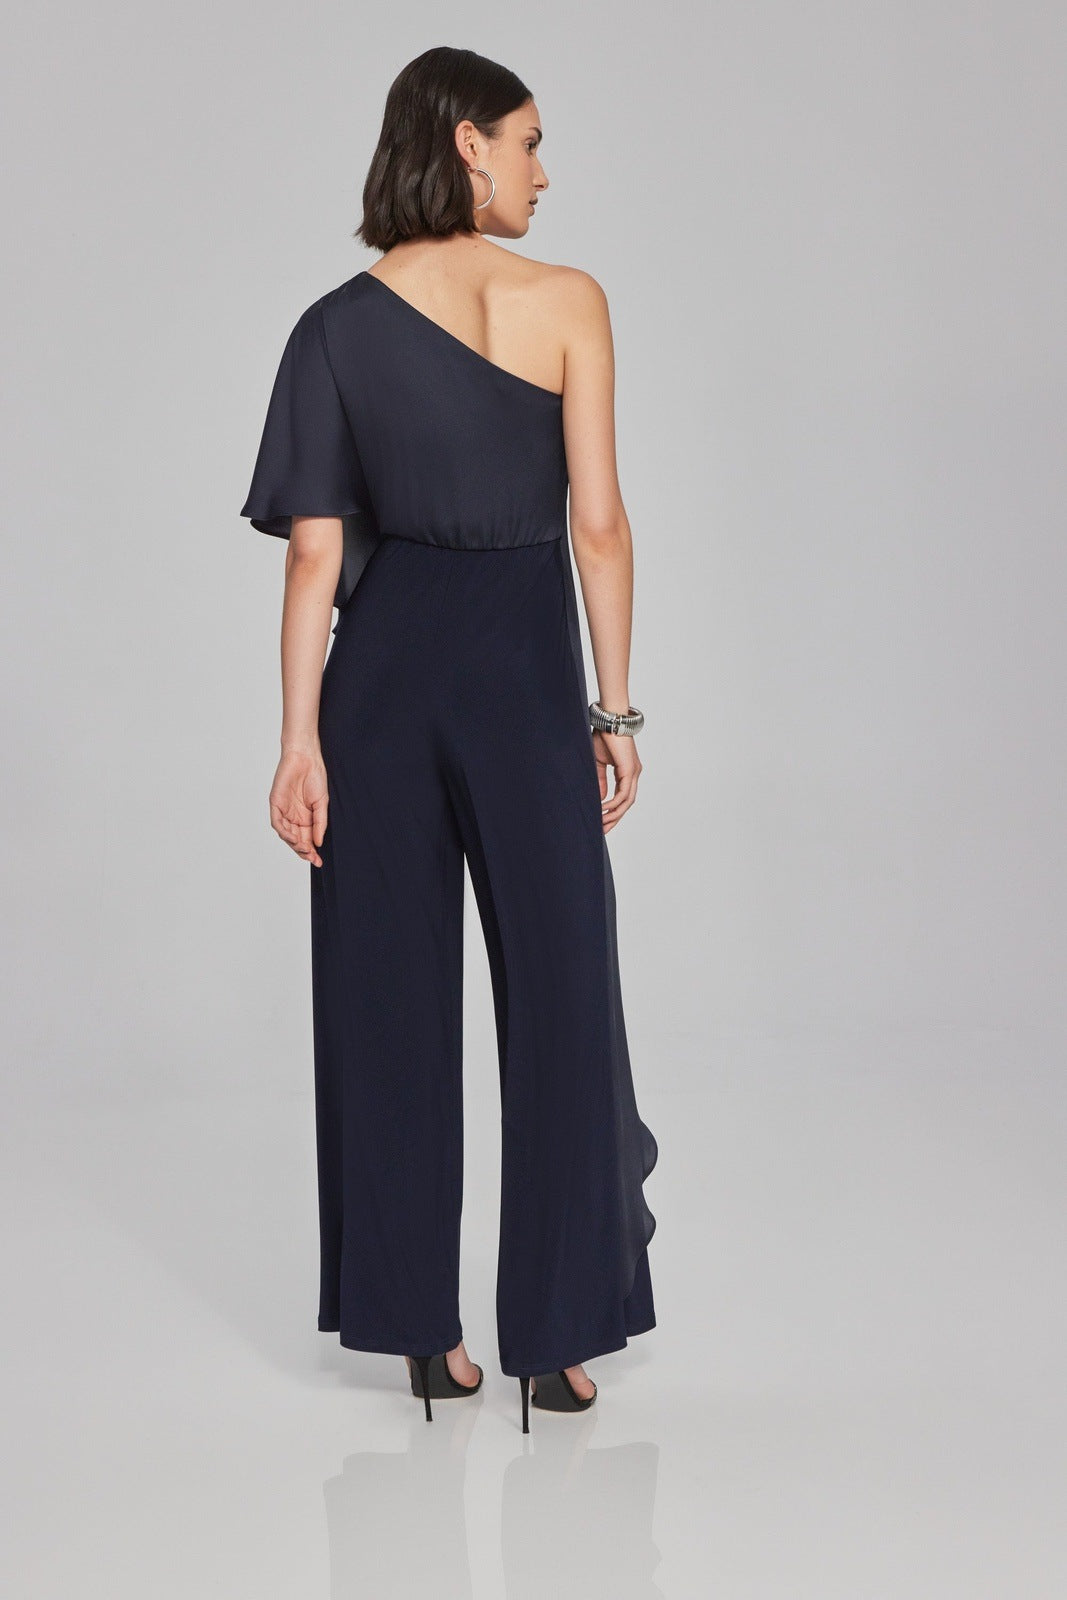 Joseph Ribkoff - Women - Satin and Silky knit One-Shoulder Jumpsuit